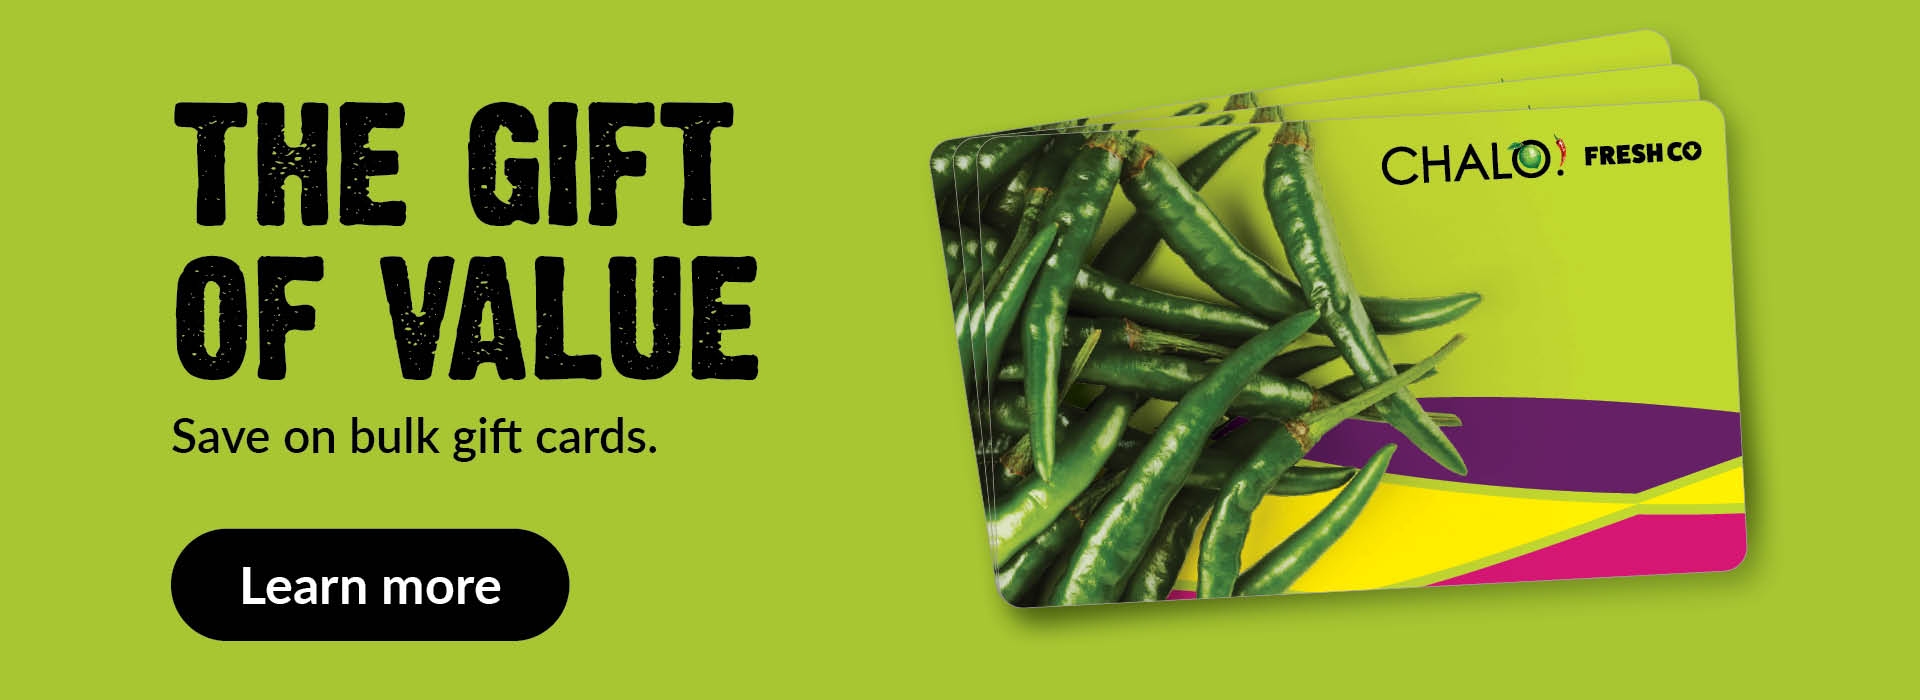 The gift of value. Save on bulk gift cards.